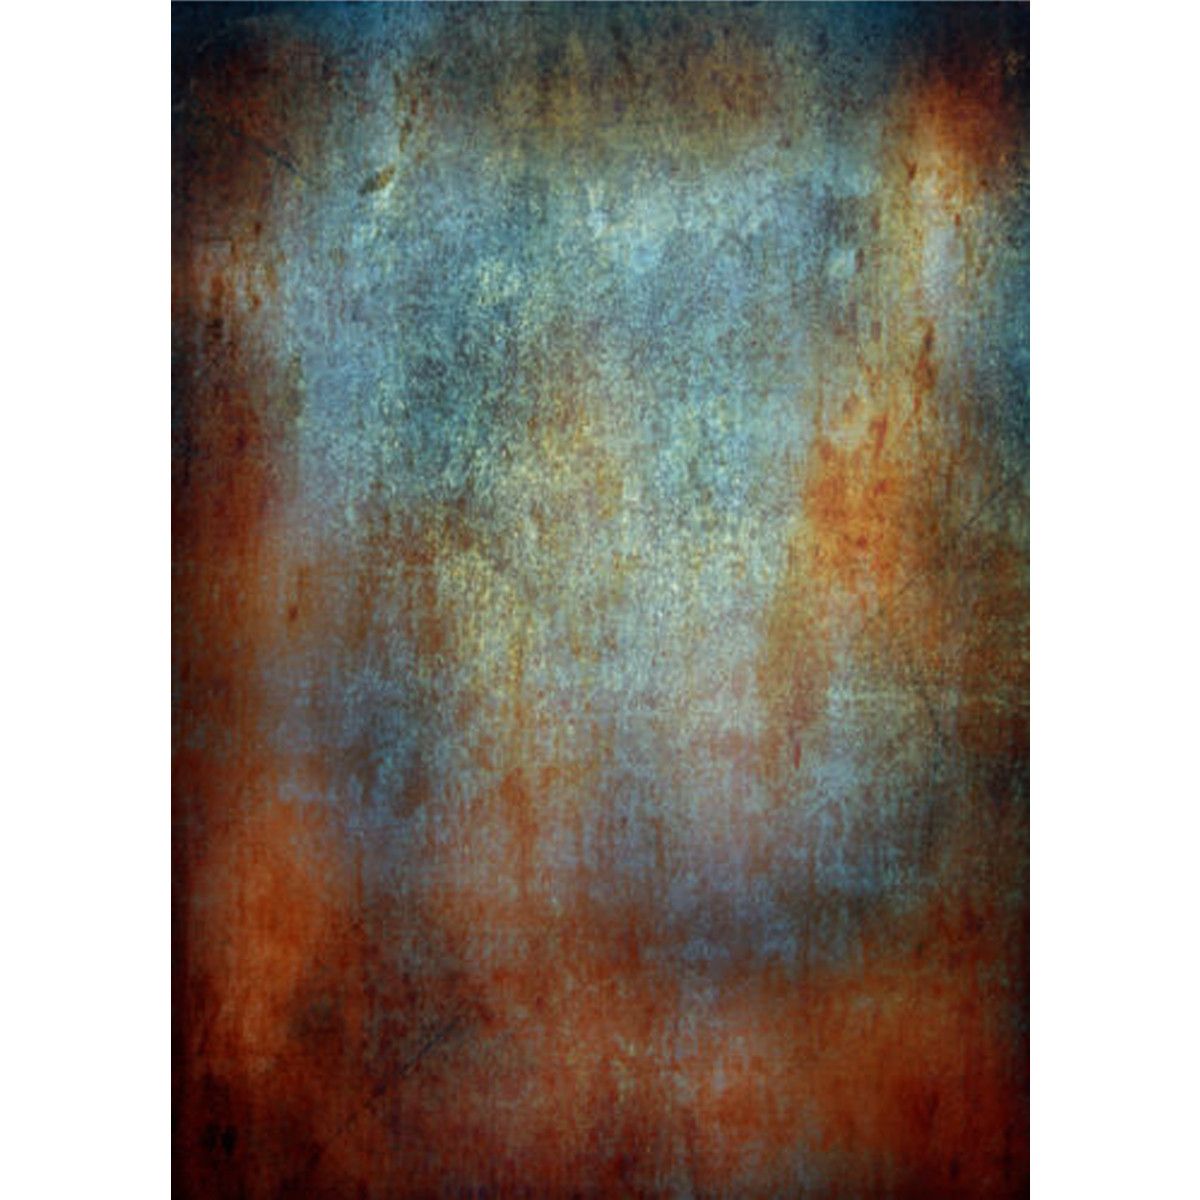 21x15m-5x7ft-Abstract-Vintage-Vinyl-Photography-Backdrop-Studio-Photo-Background-Props-1039723